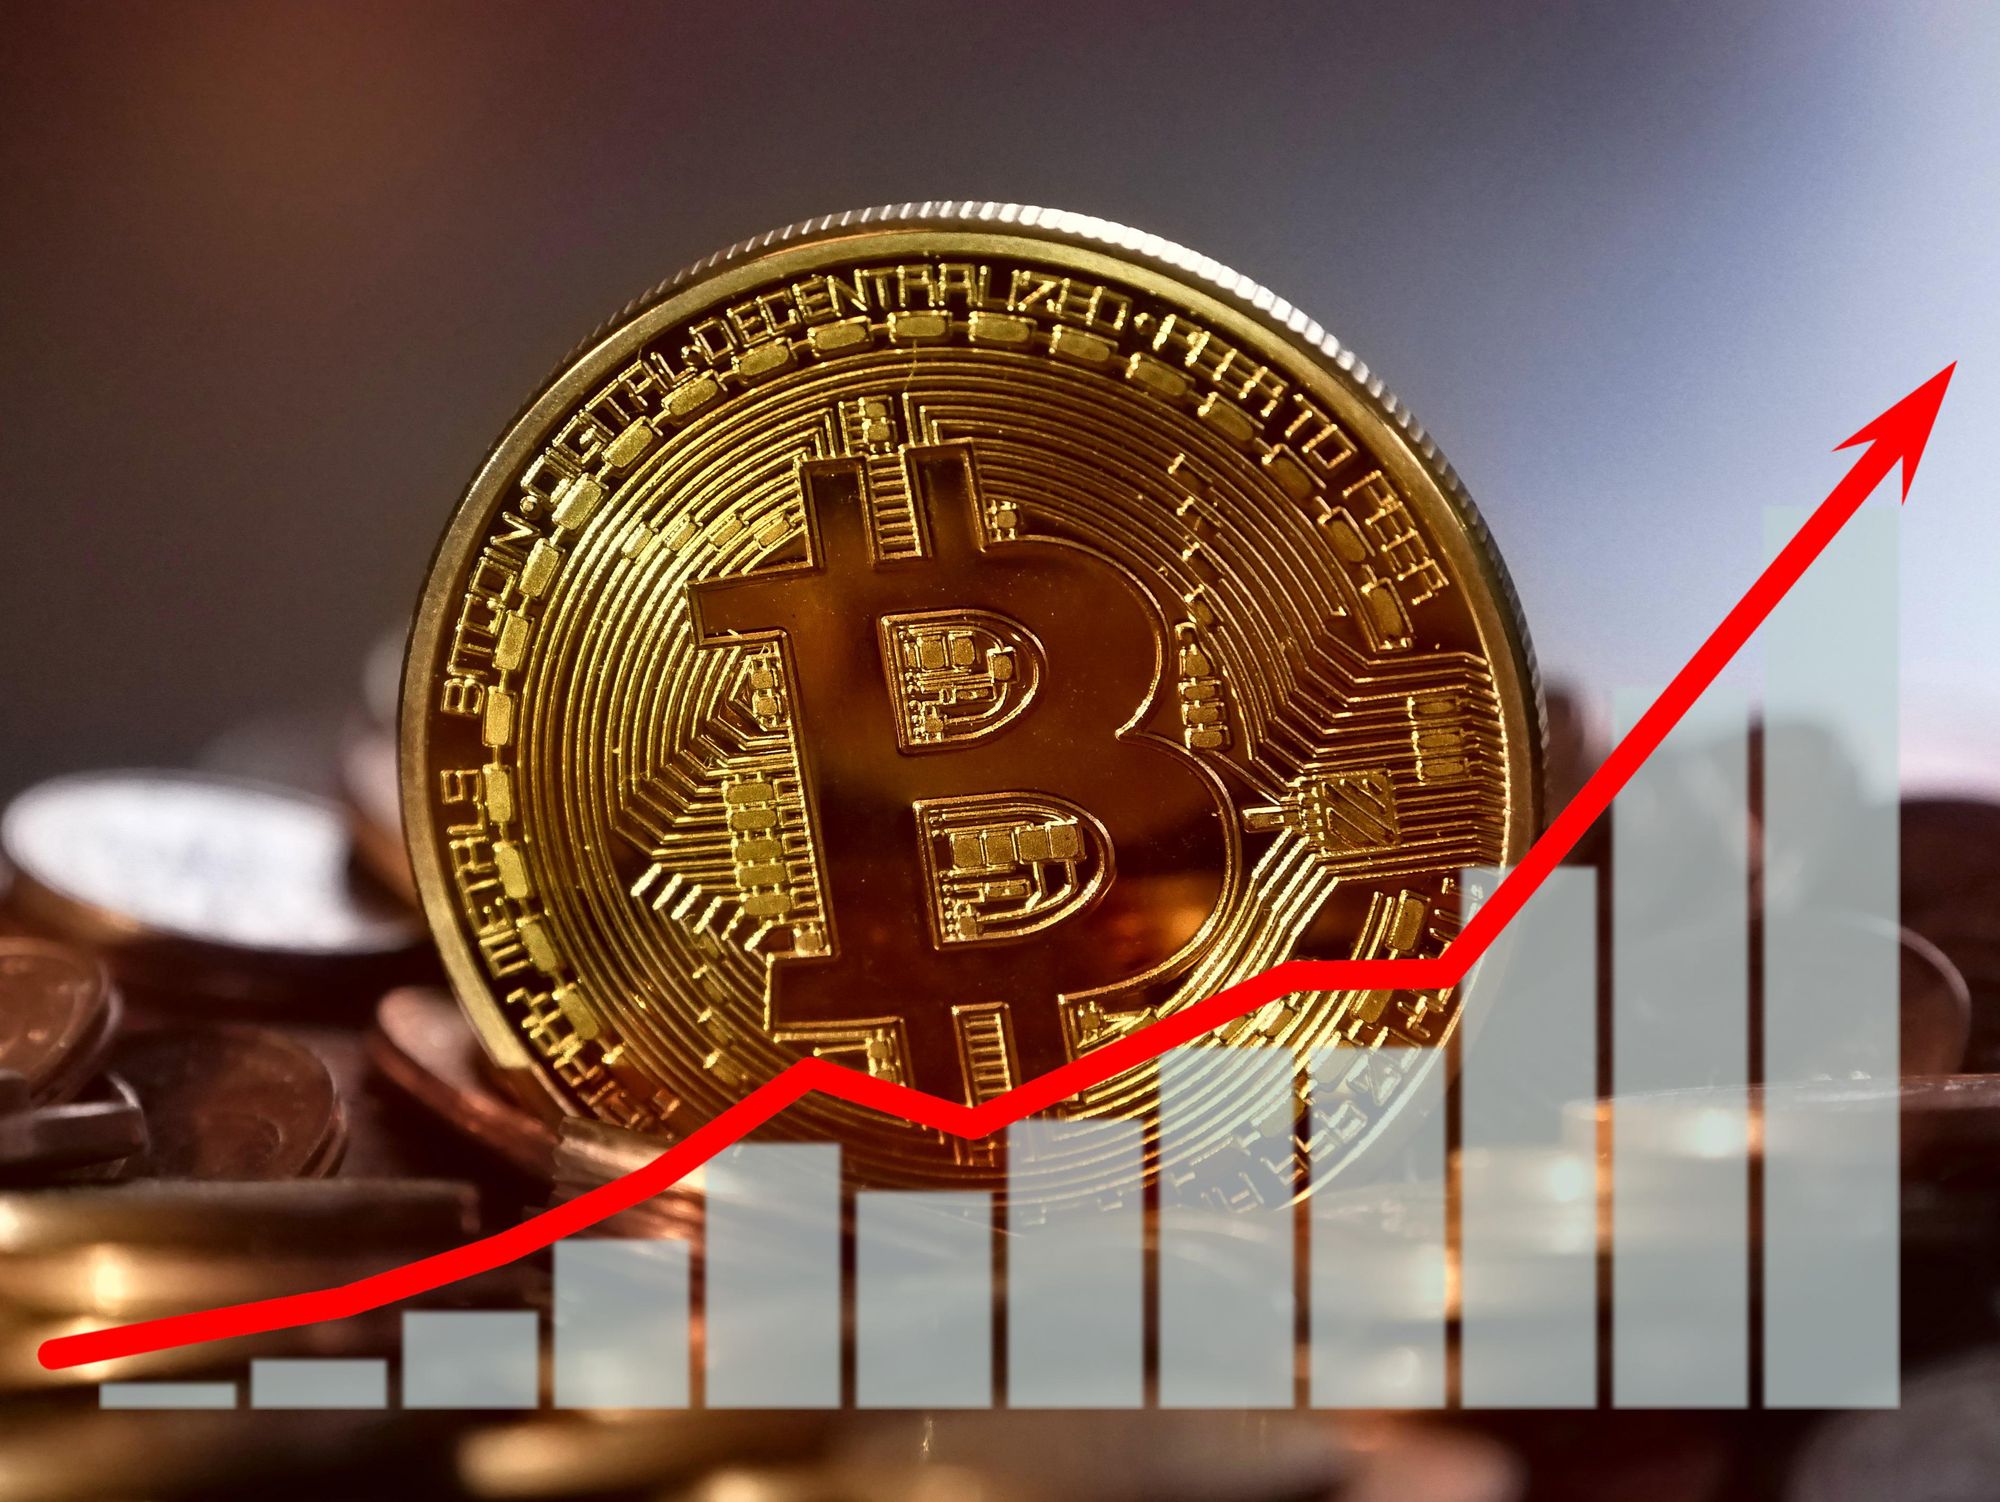 Bitcoin next to bar chart with the price trend going up